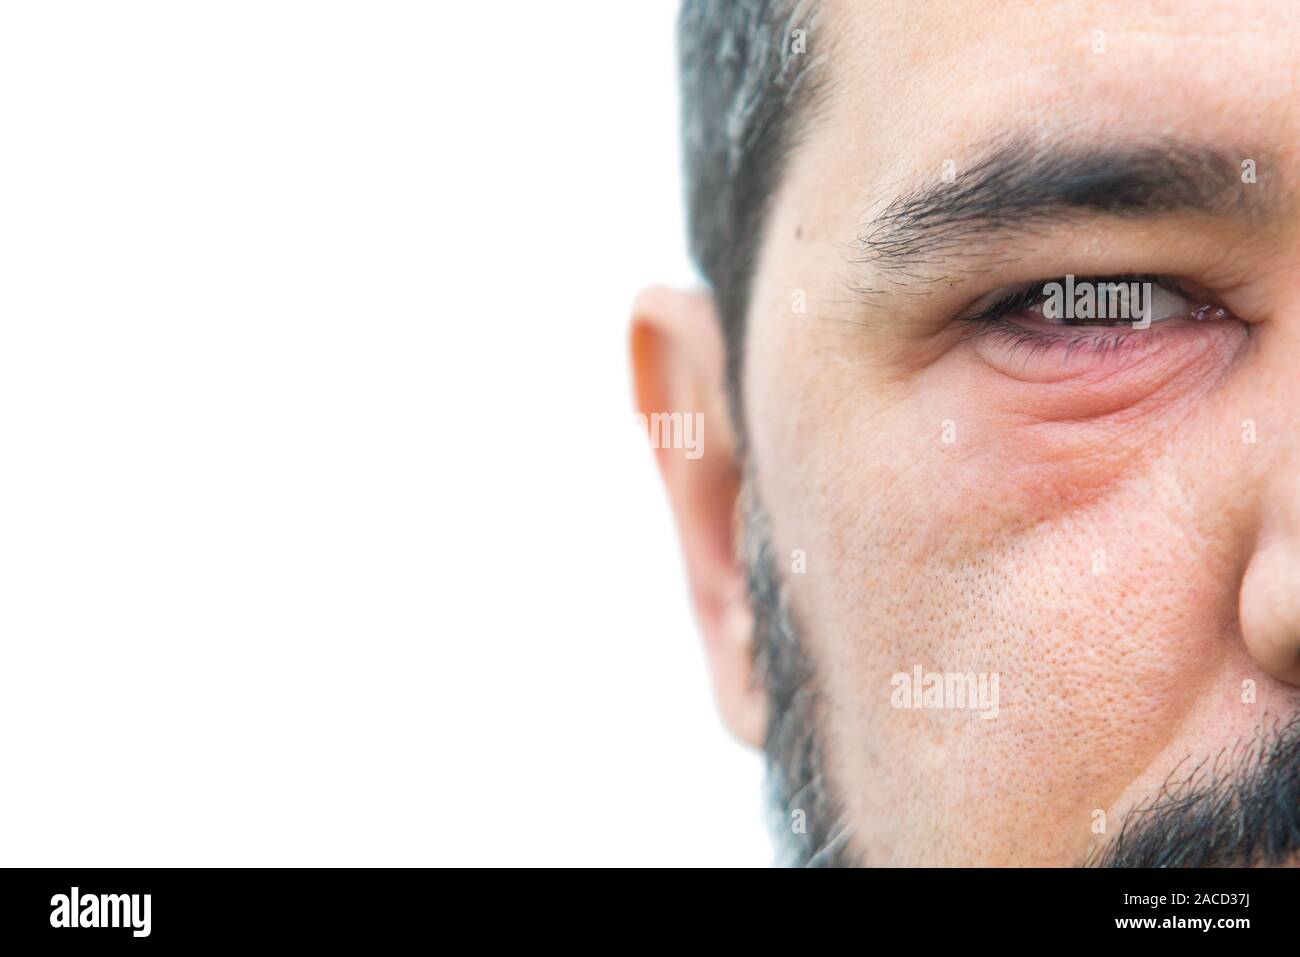 Man with stye in the eye with copy space for text Stock Photo